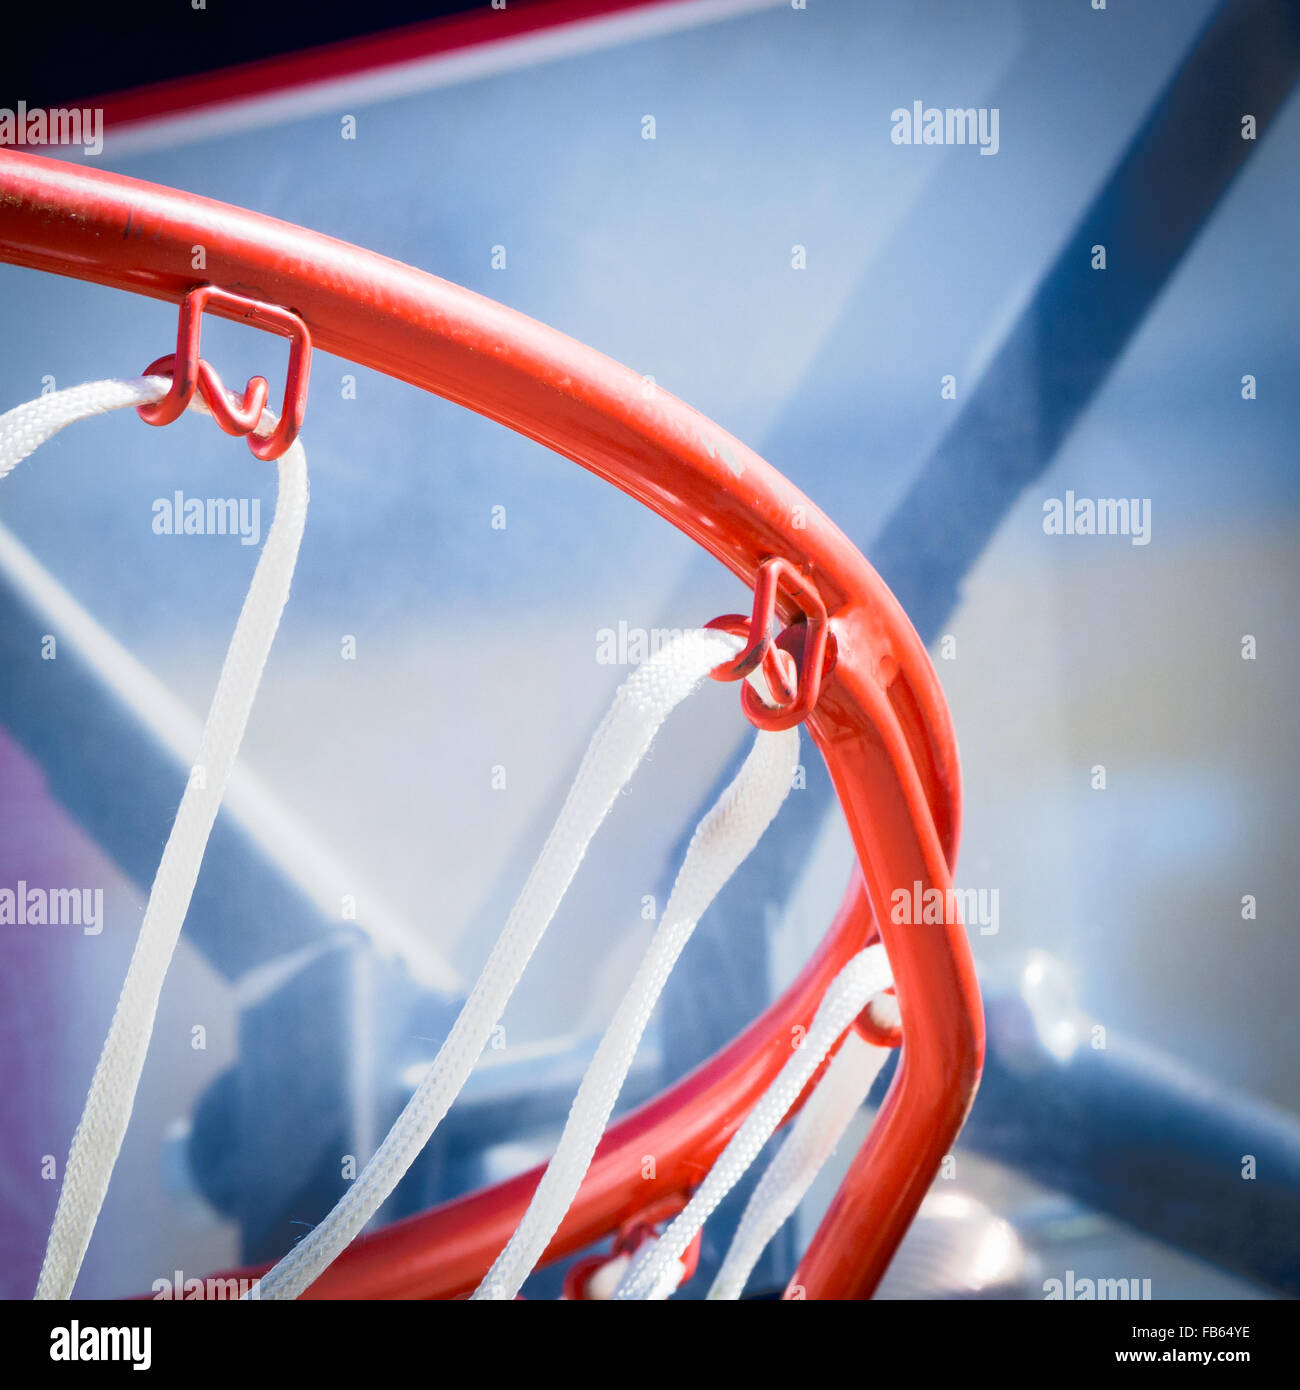 Inside of a basketball. Close up image of a basketball Stock Photo